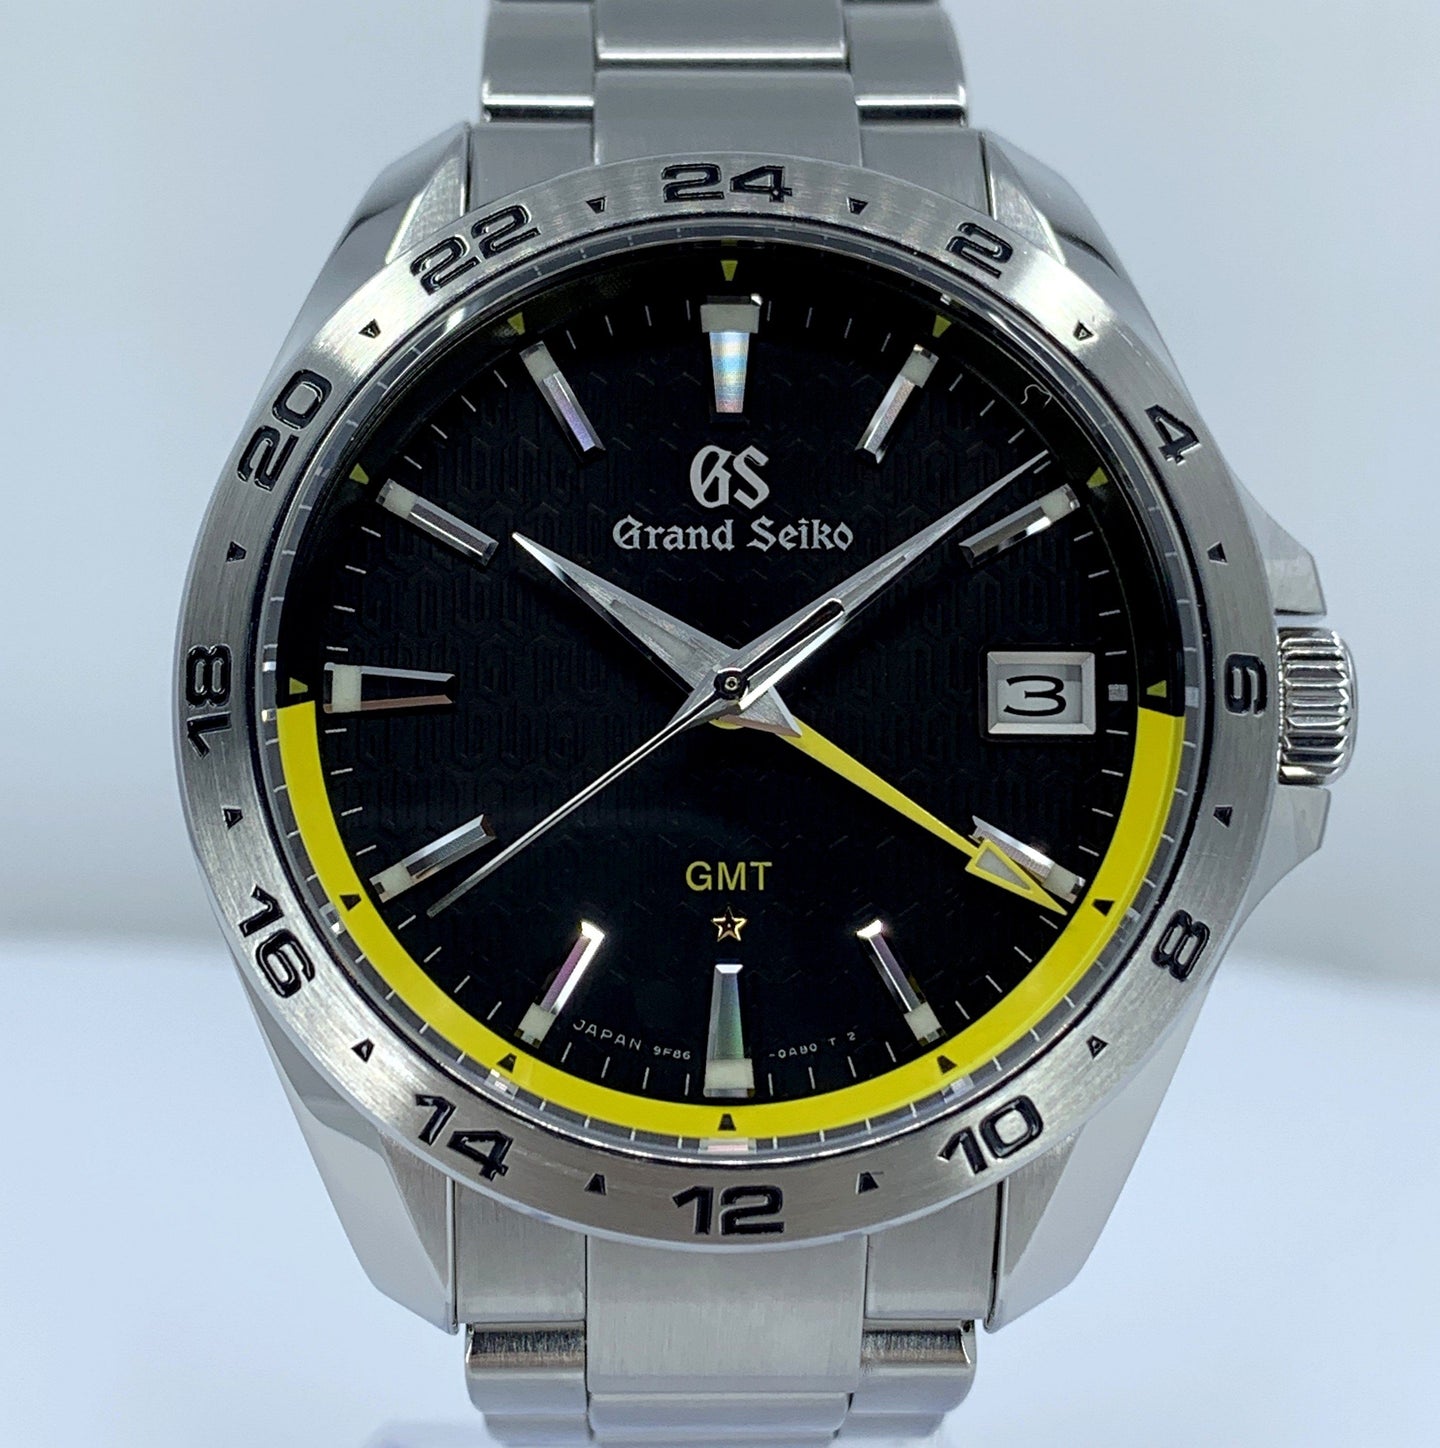 Grand Seiko GMT Limited Edition 800